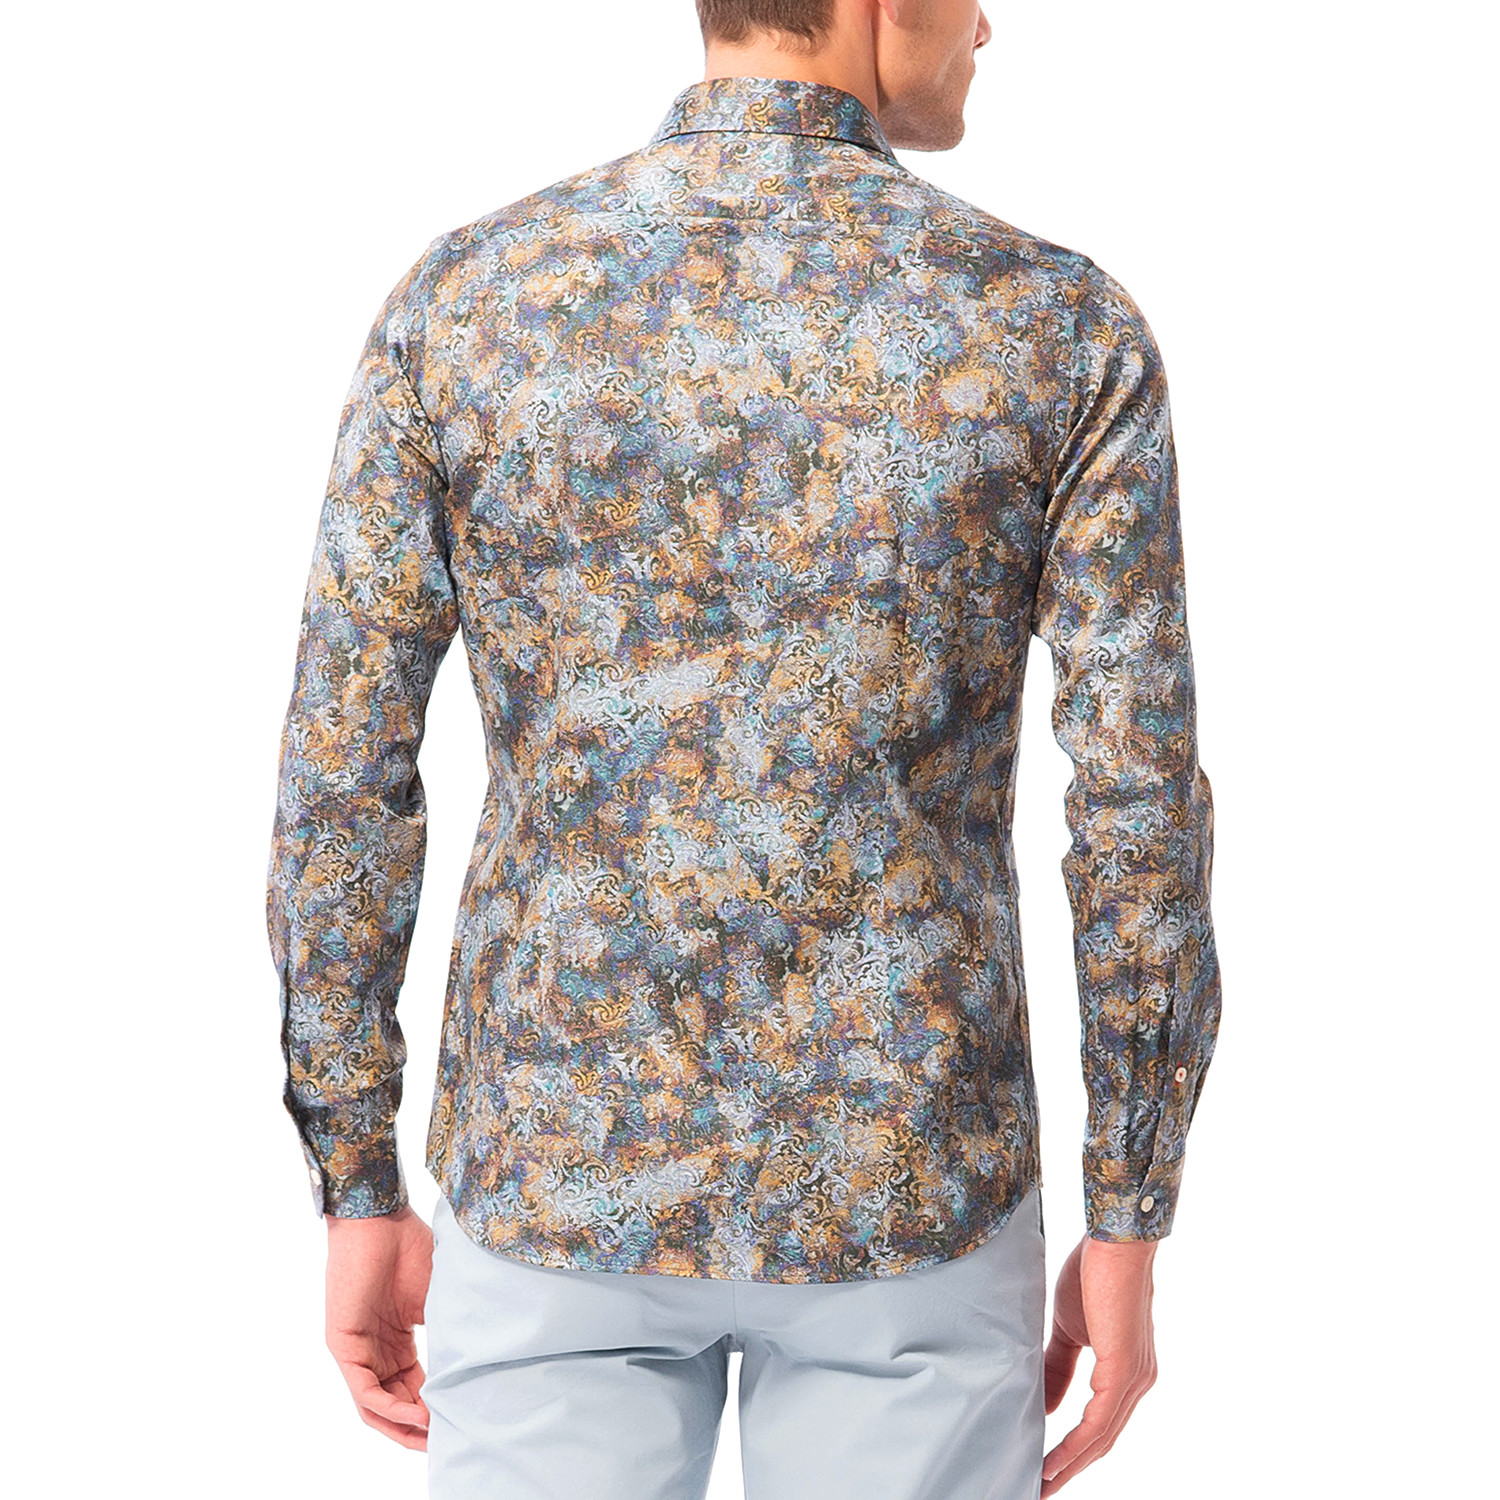 Decorative Pattern Button-Up Shirt // Multi (S) - Dufy - Touch of Modern